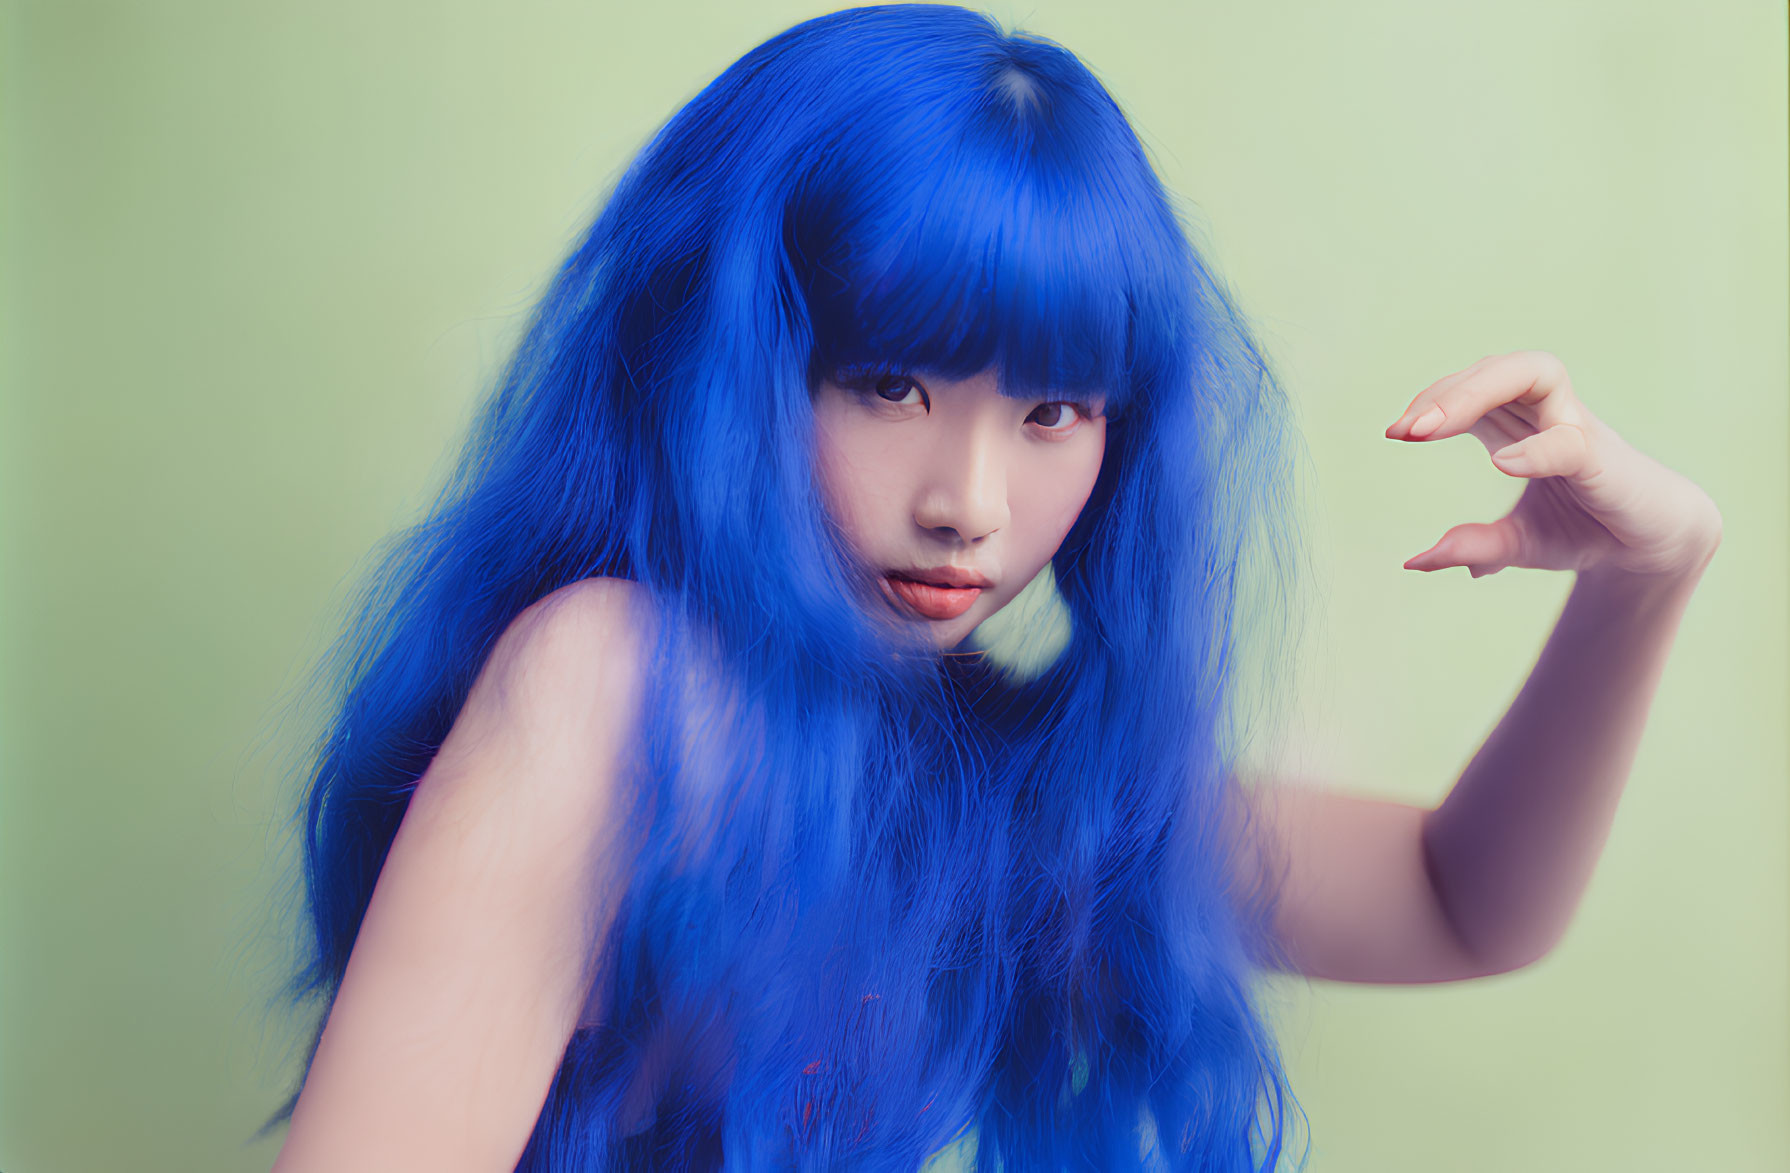 Vibrant Blue-Haired Person Posing Against Green Background